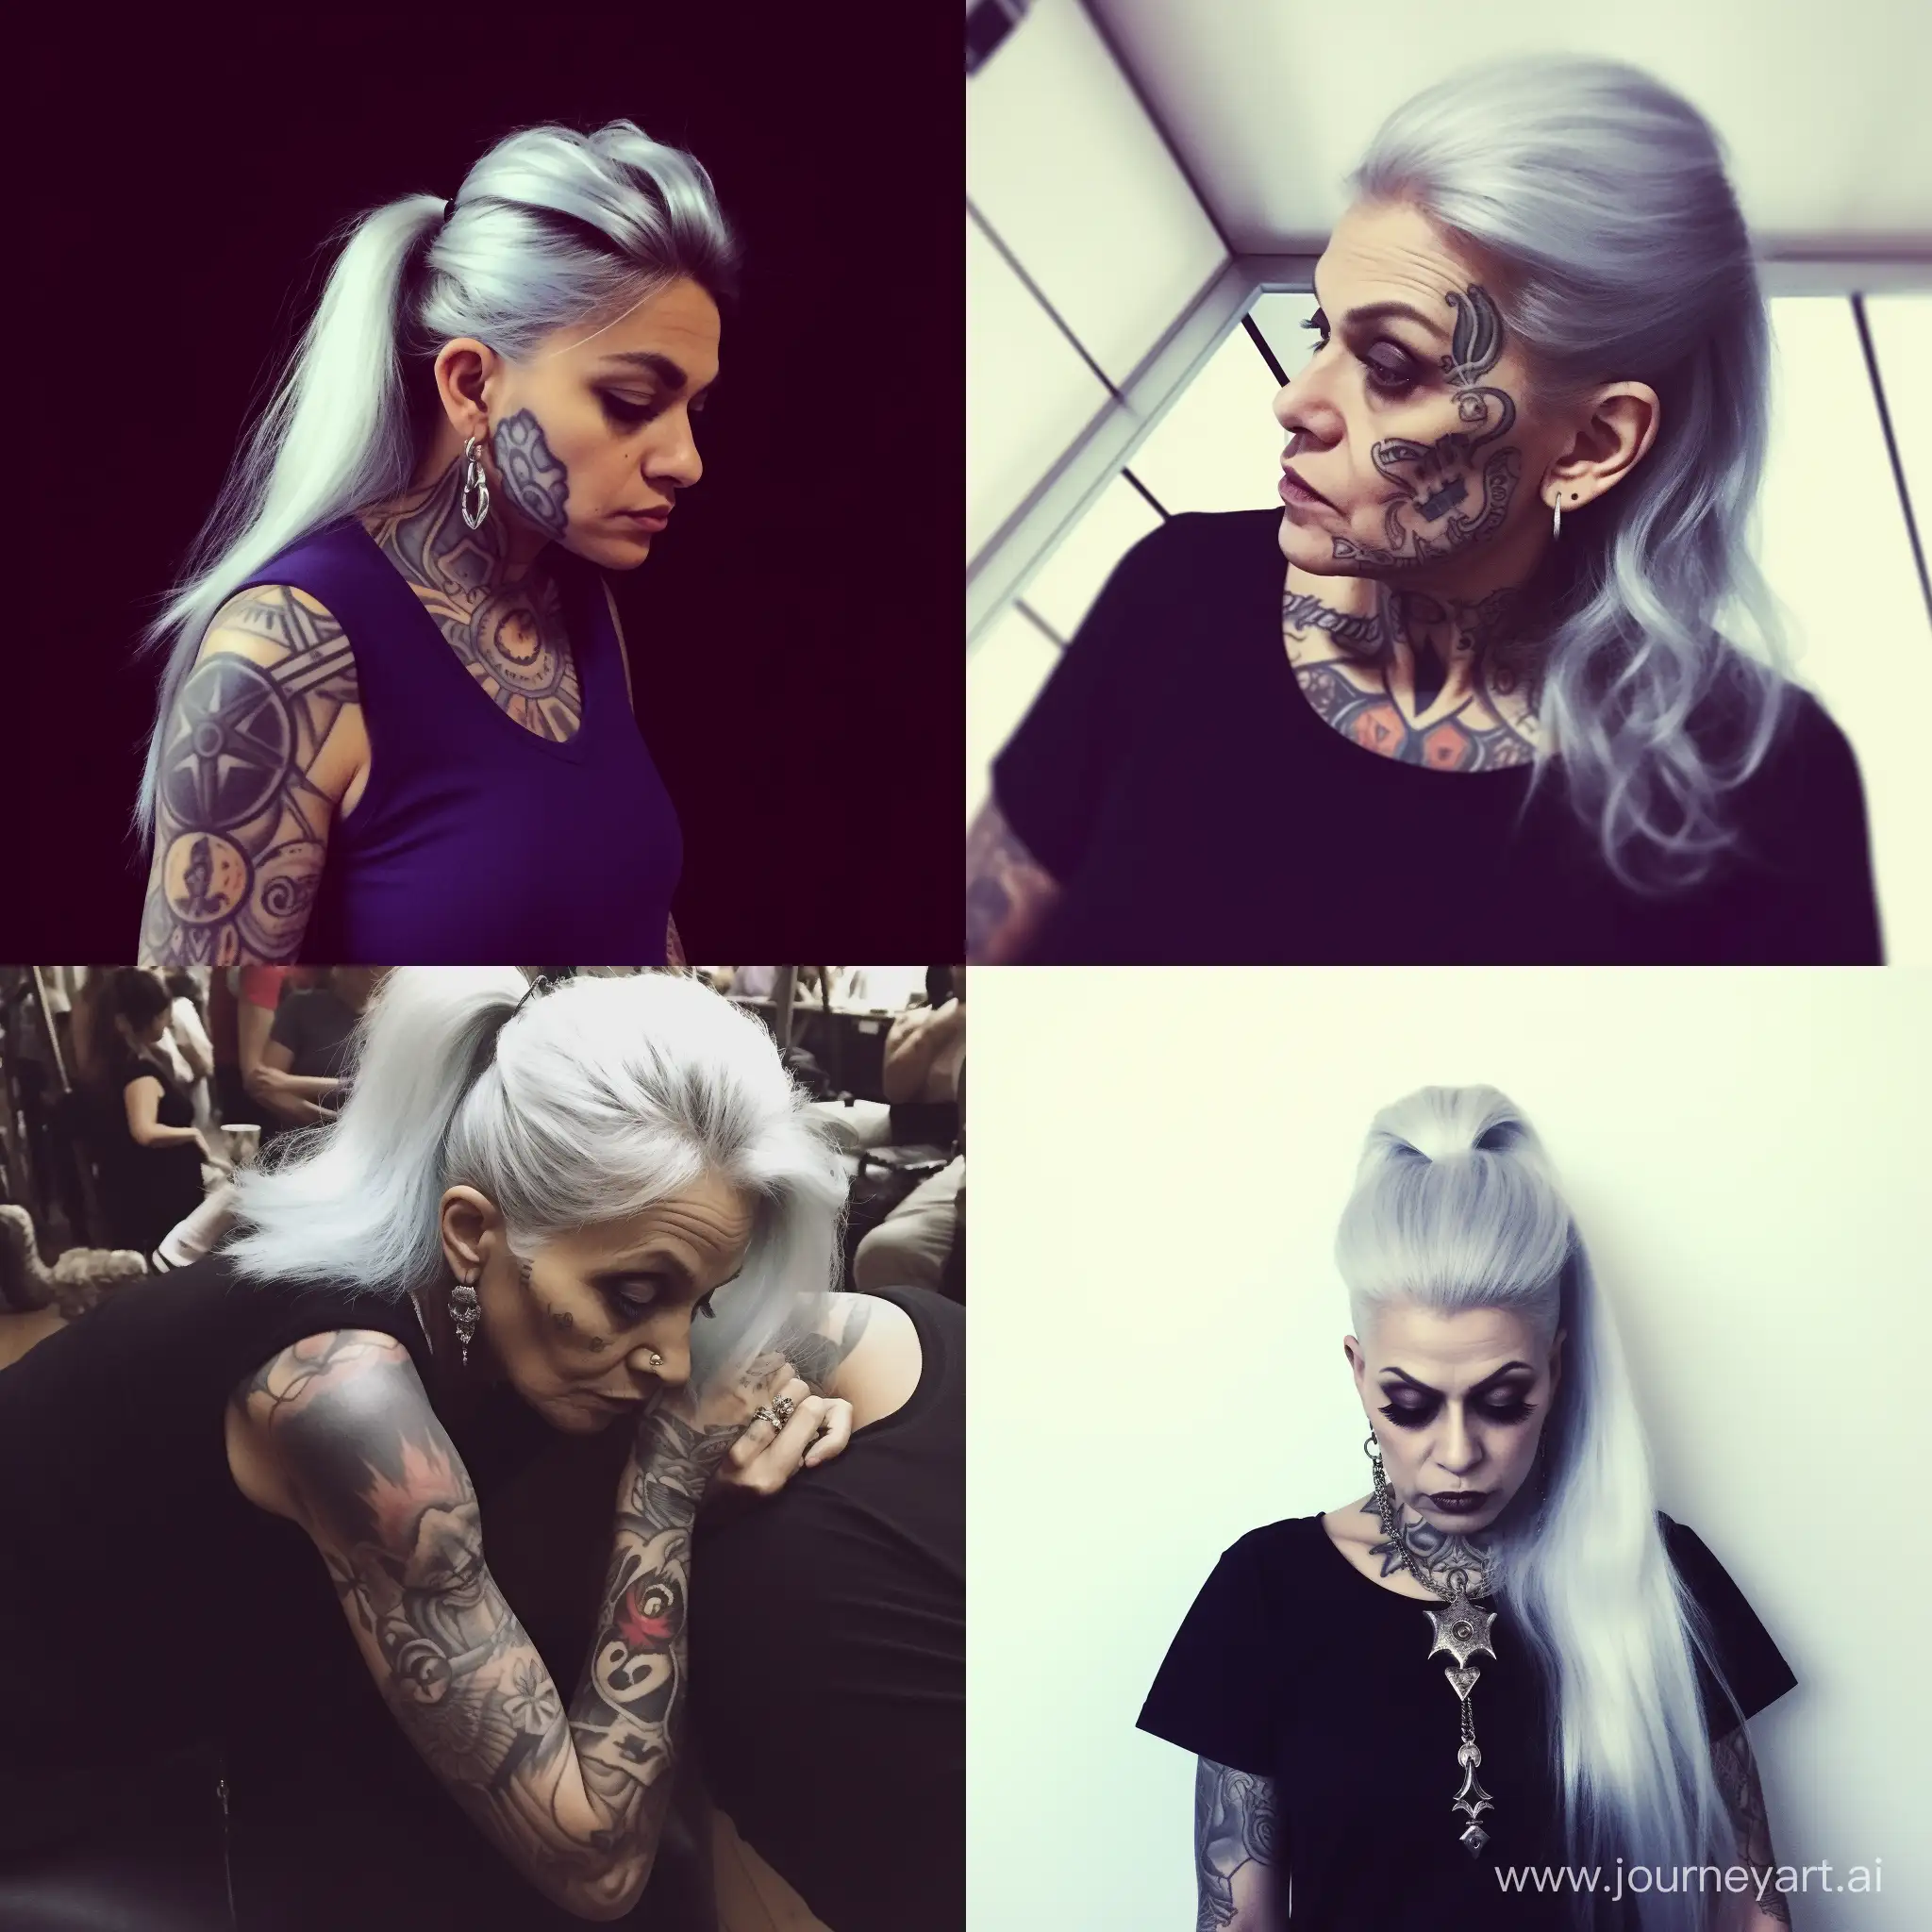 Interior selfie of a tattooed woman with silver hair and piercings,shot on a low camera quality phone